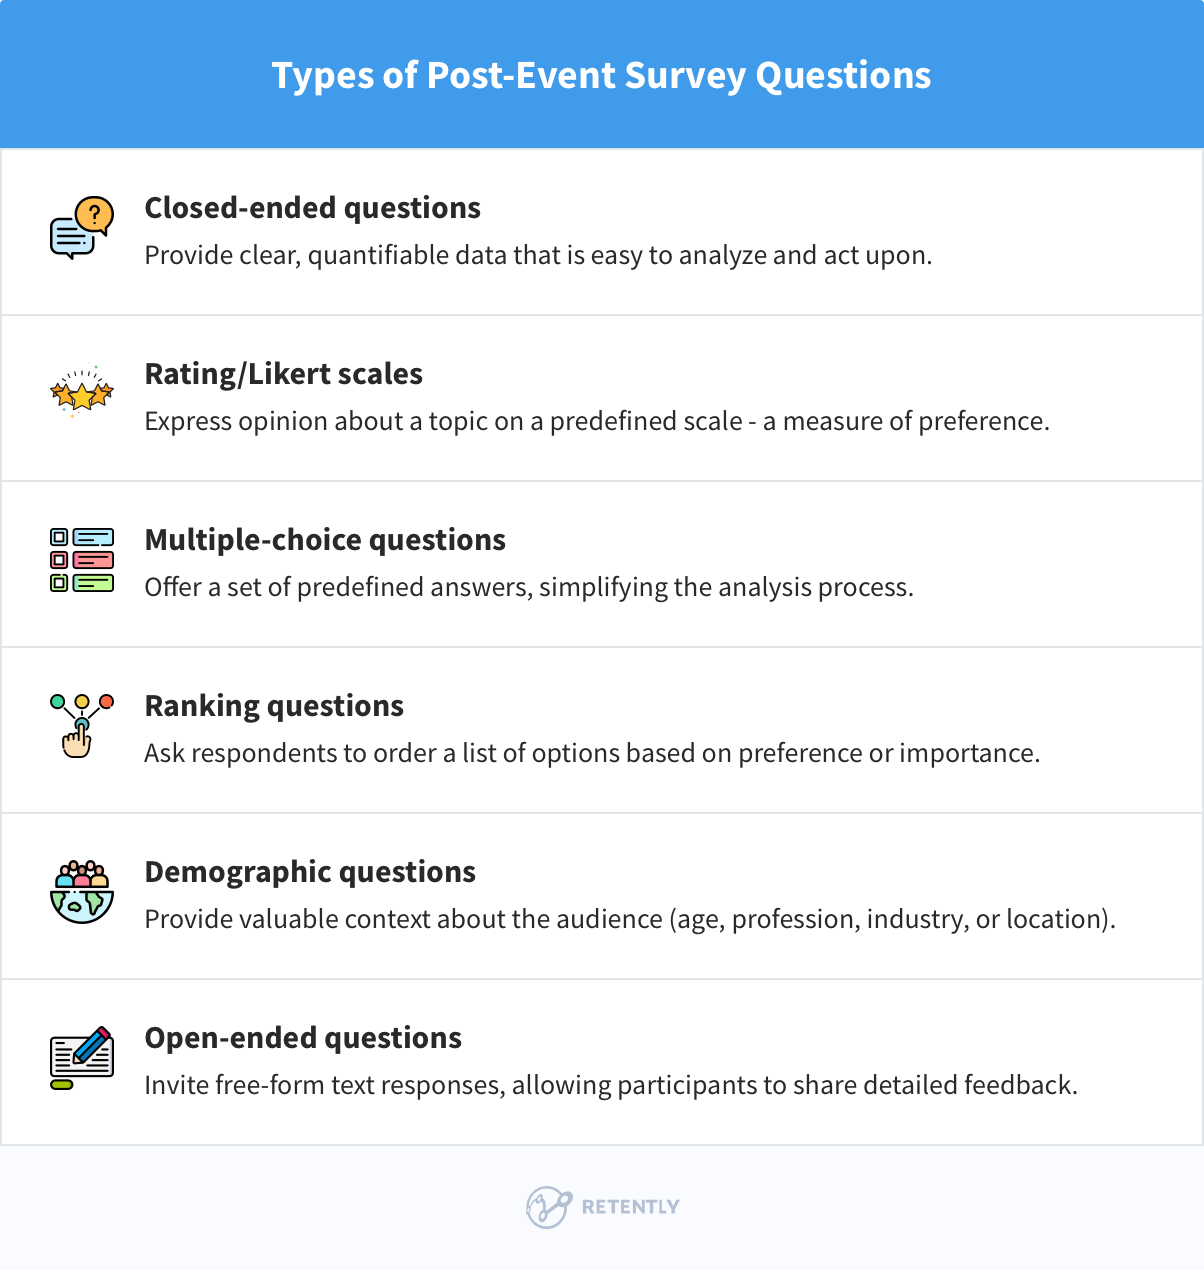 Types of Post-Event Survey Questions